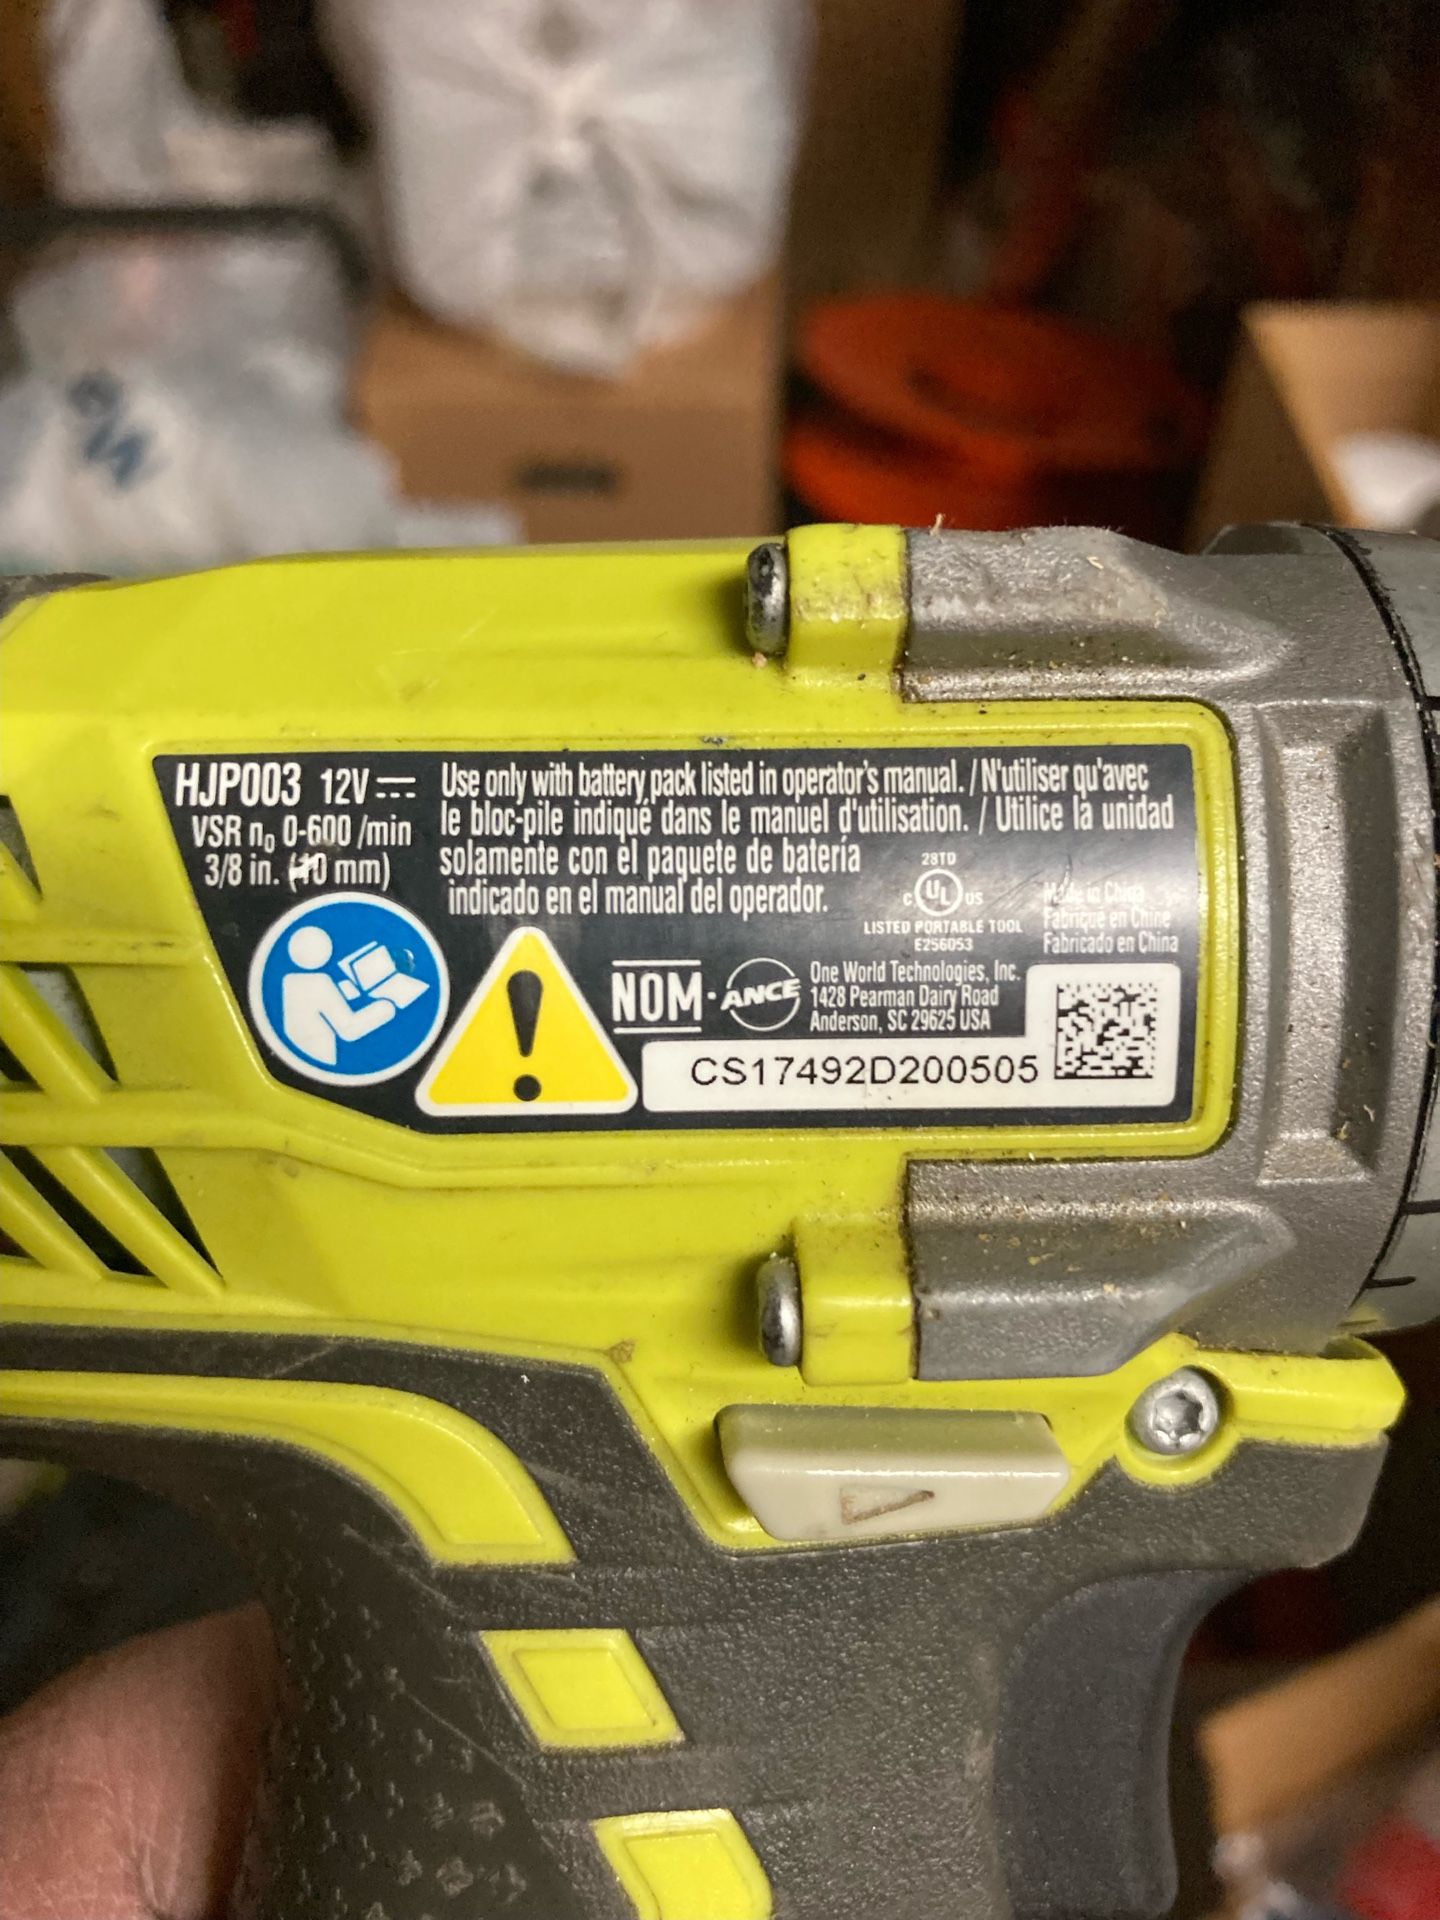 Ryobi Drill with 12v Lithium Battery, model HJP003, charger not available  for Sale in Aurora, CO - OfferUp